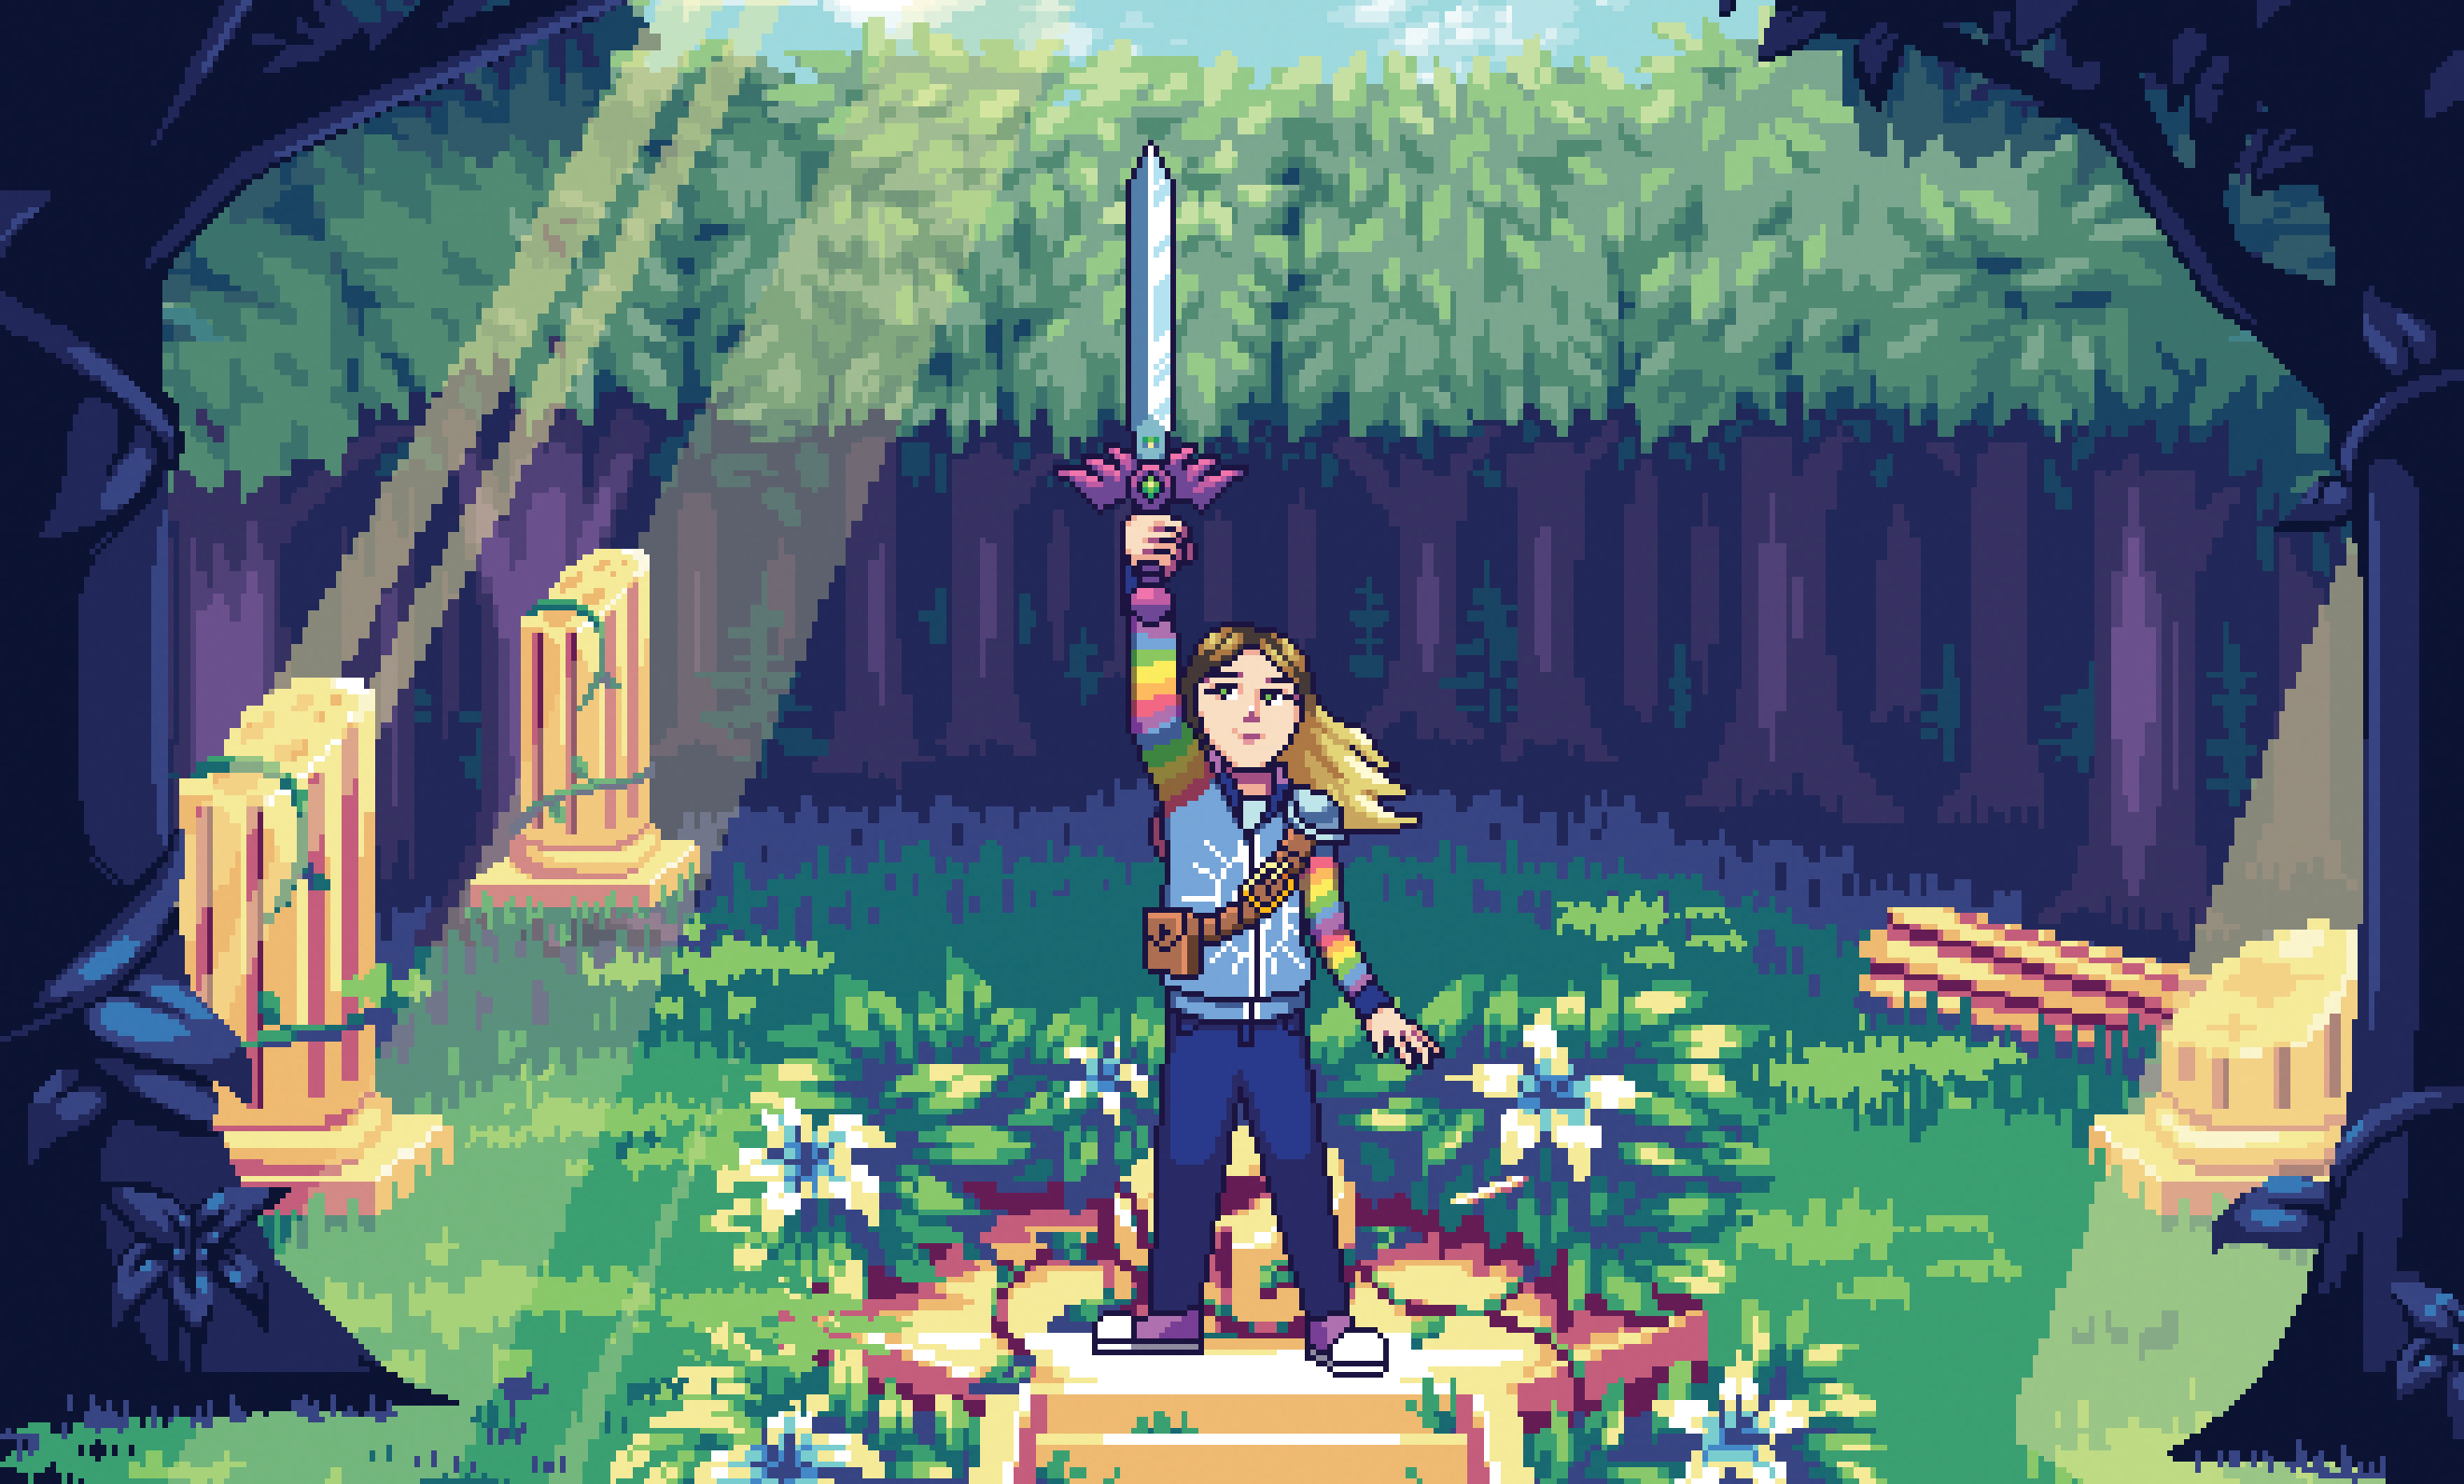 A blonde girl in a hoodie with rainbow-striped arms holds a sword aloft in a wooded, sunlit glen in a 16-bit-style promotional image for the Legend of Zelda documentary film Break the Game